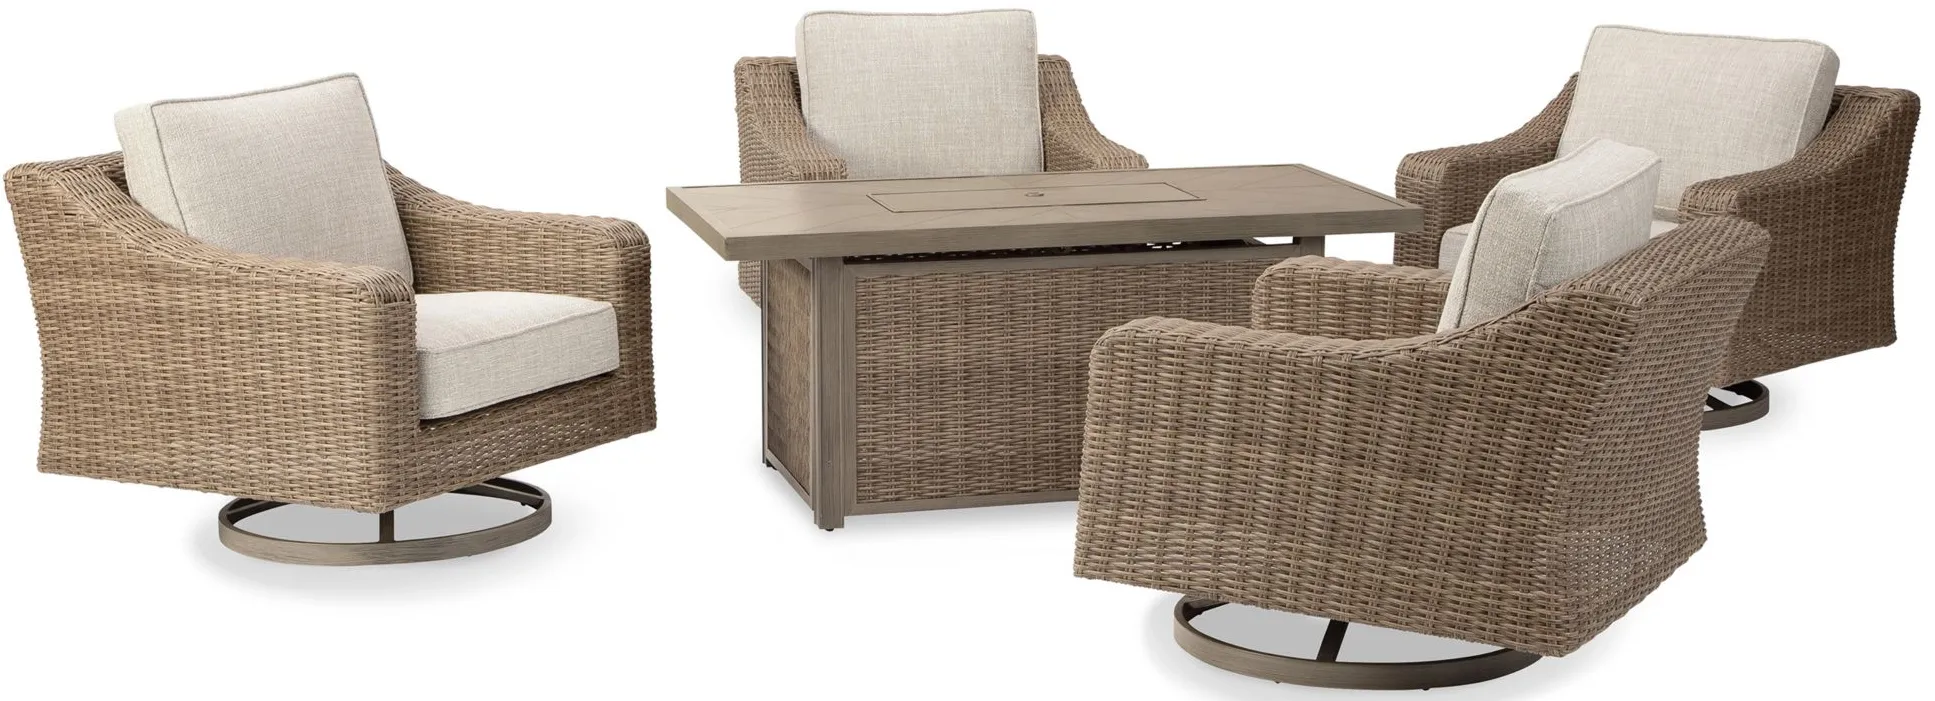 Beachcroft Outdoor Set -5pc. in Brown by Ashley Furniture